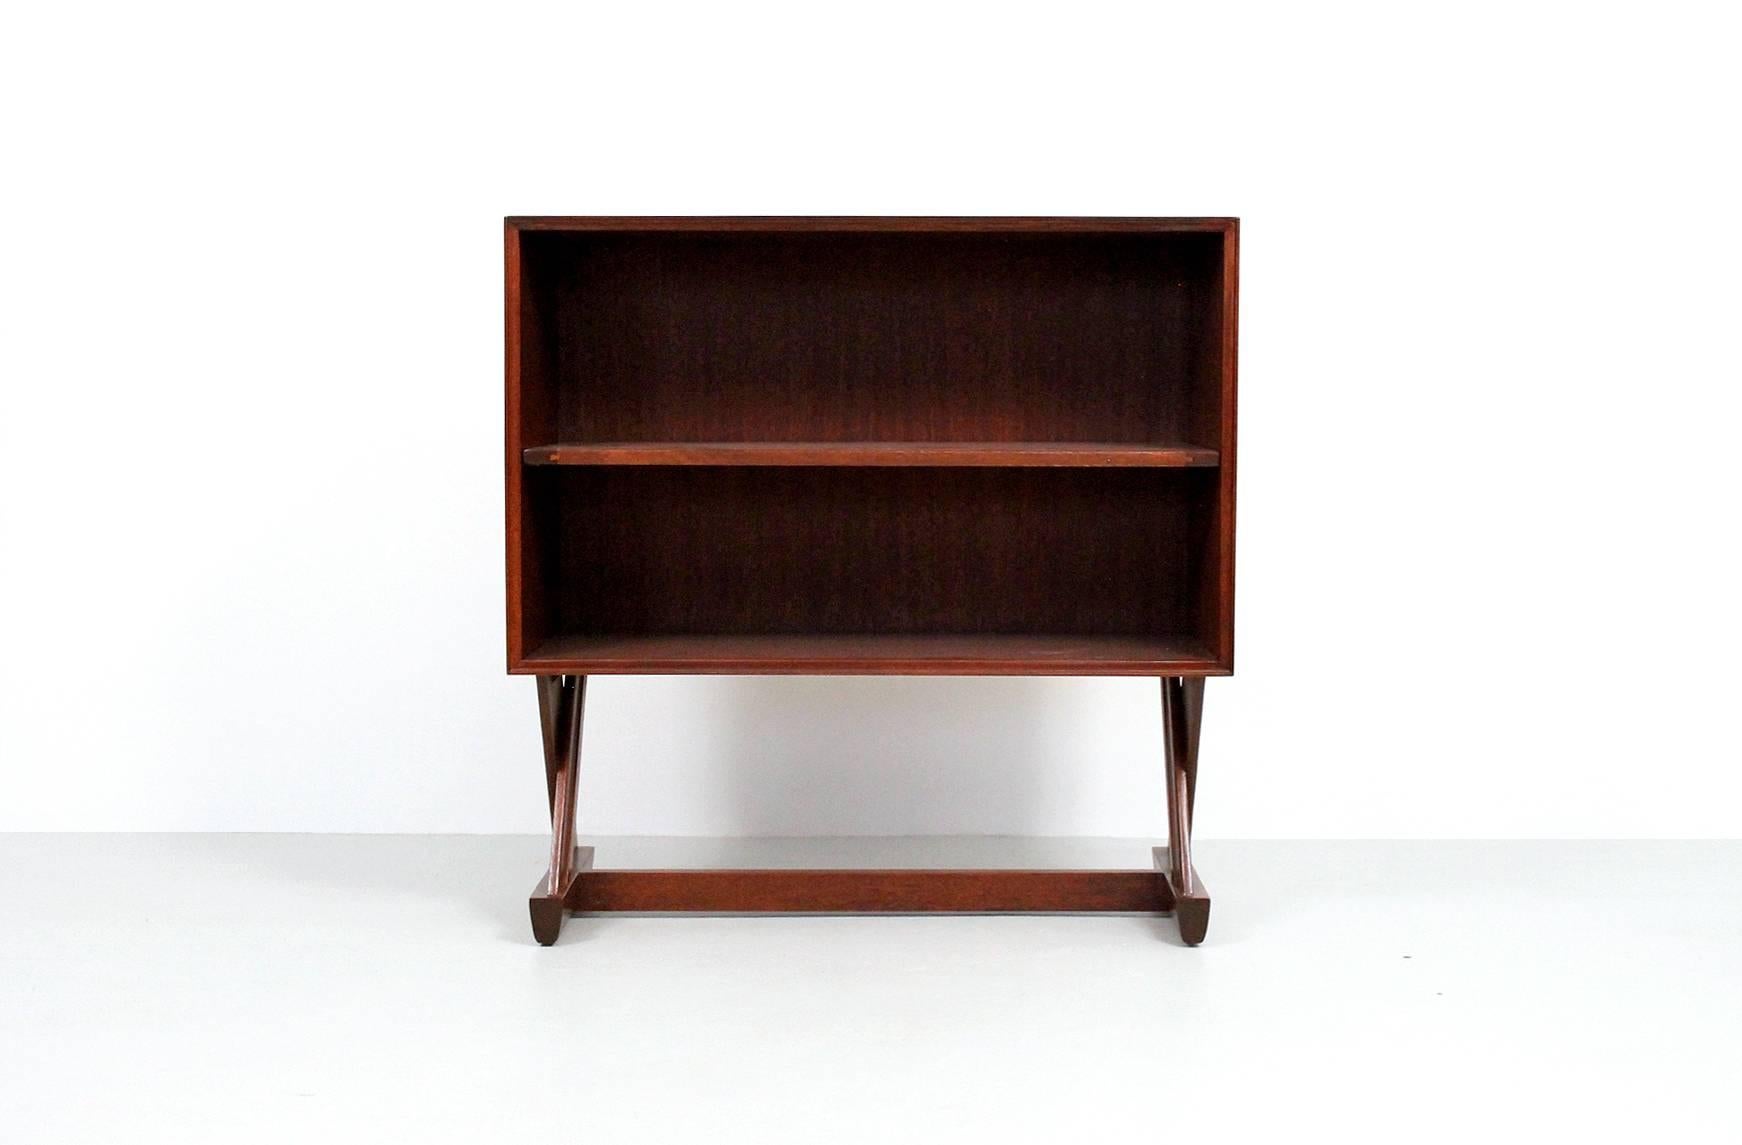 Matched pair of bookcases designed by Paul Laszlo for Brown Saltman. Bookcases executed in mahogany and feature opposing X-bases and a single adjustable shelf. Marked on reverse side. Placed side by side they create a large open console.